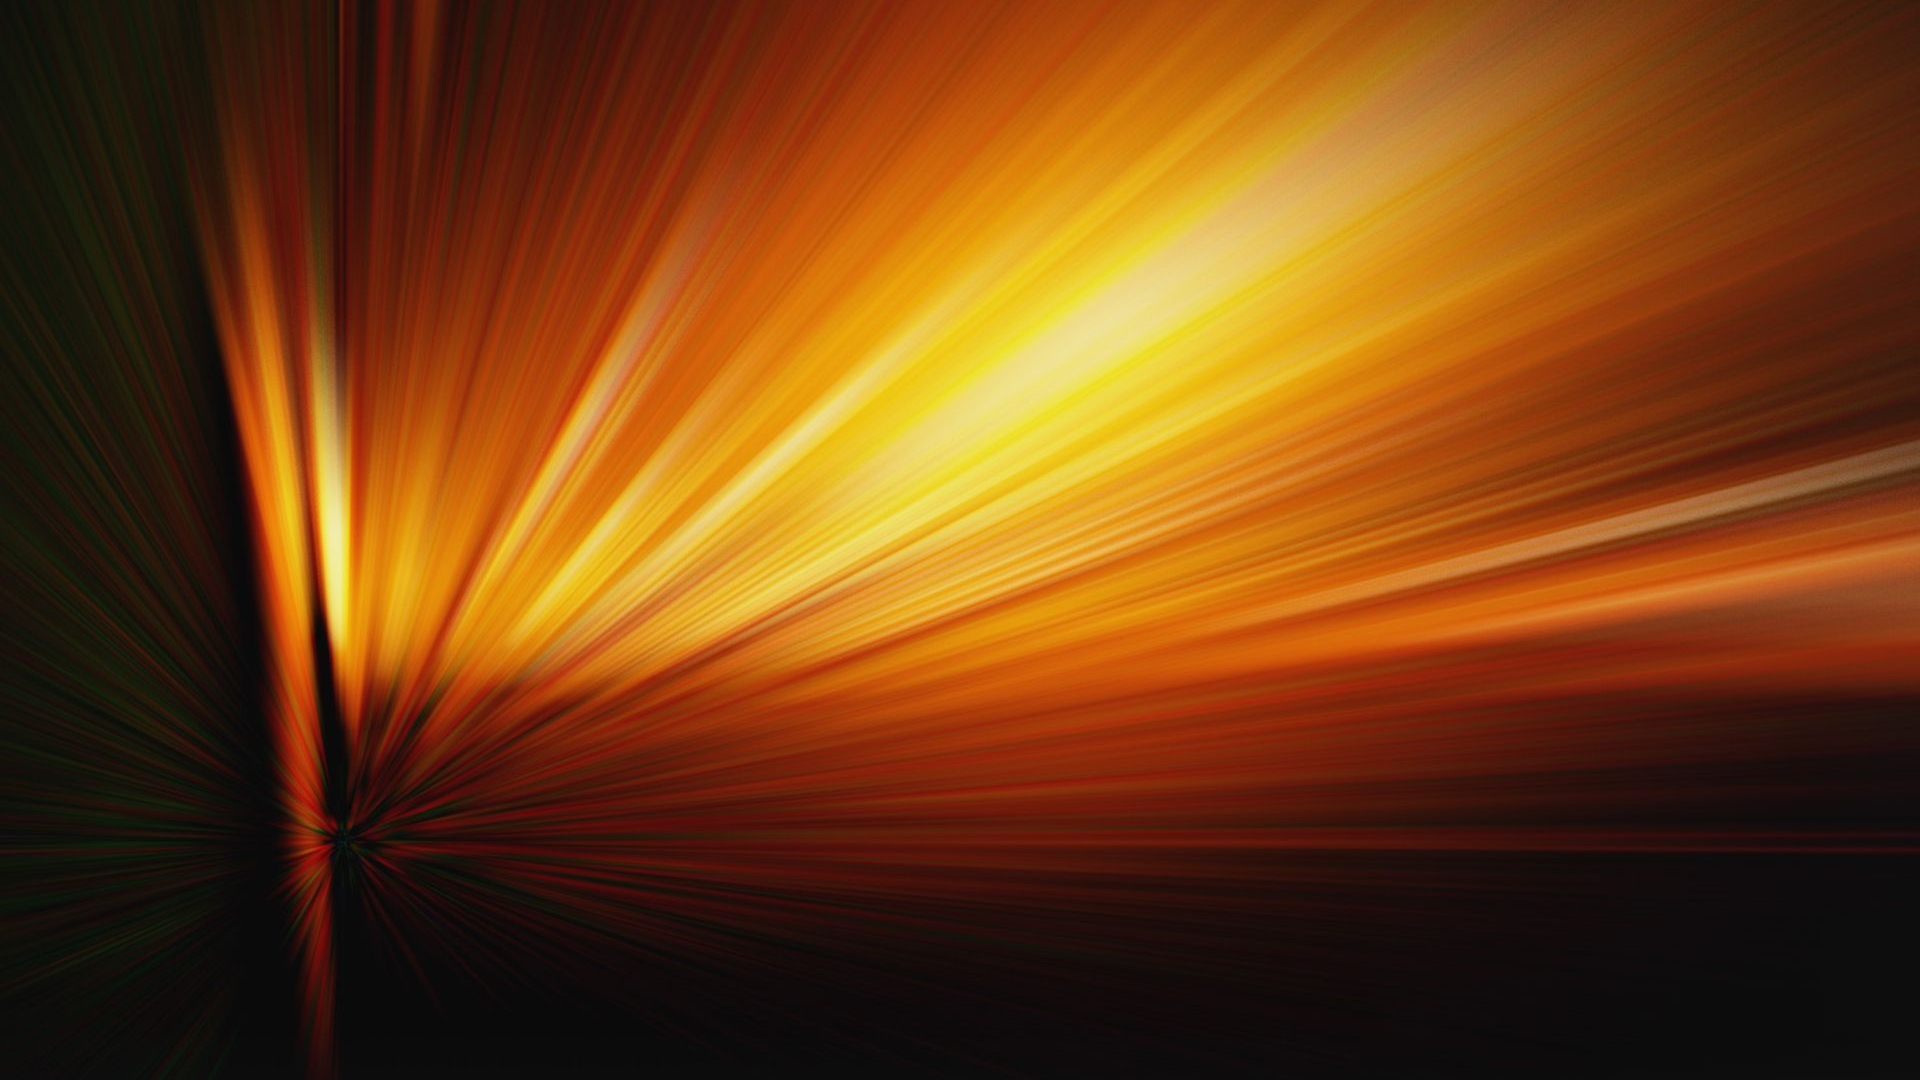 Abstract Gold 1920x1080